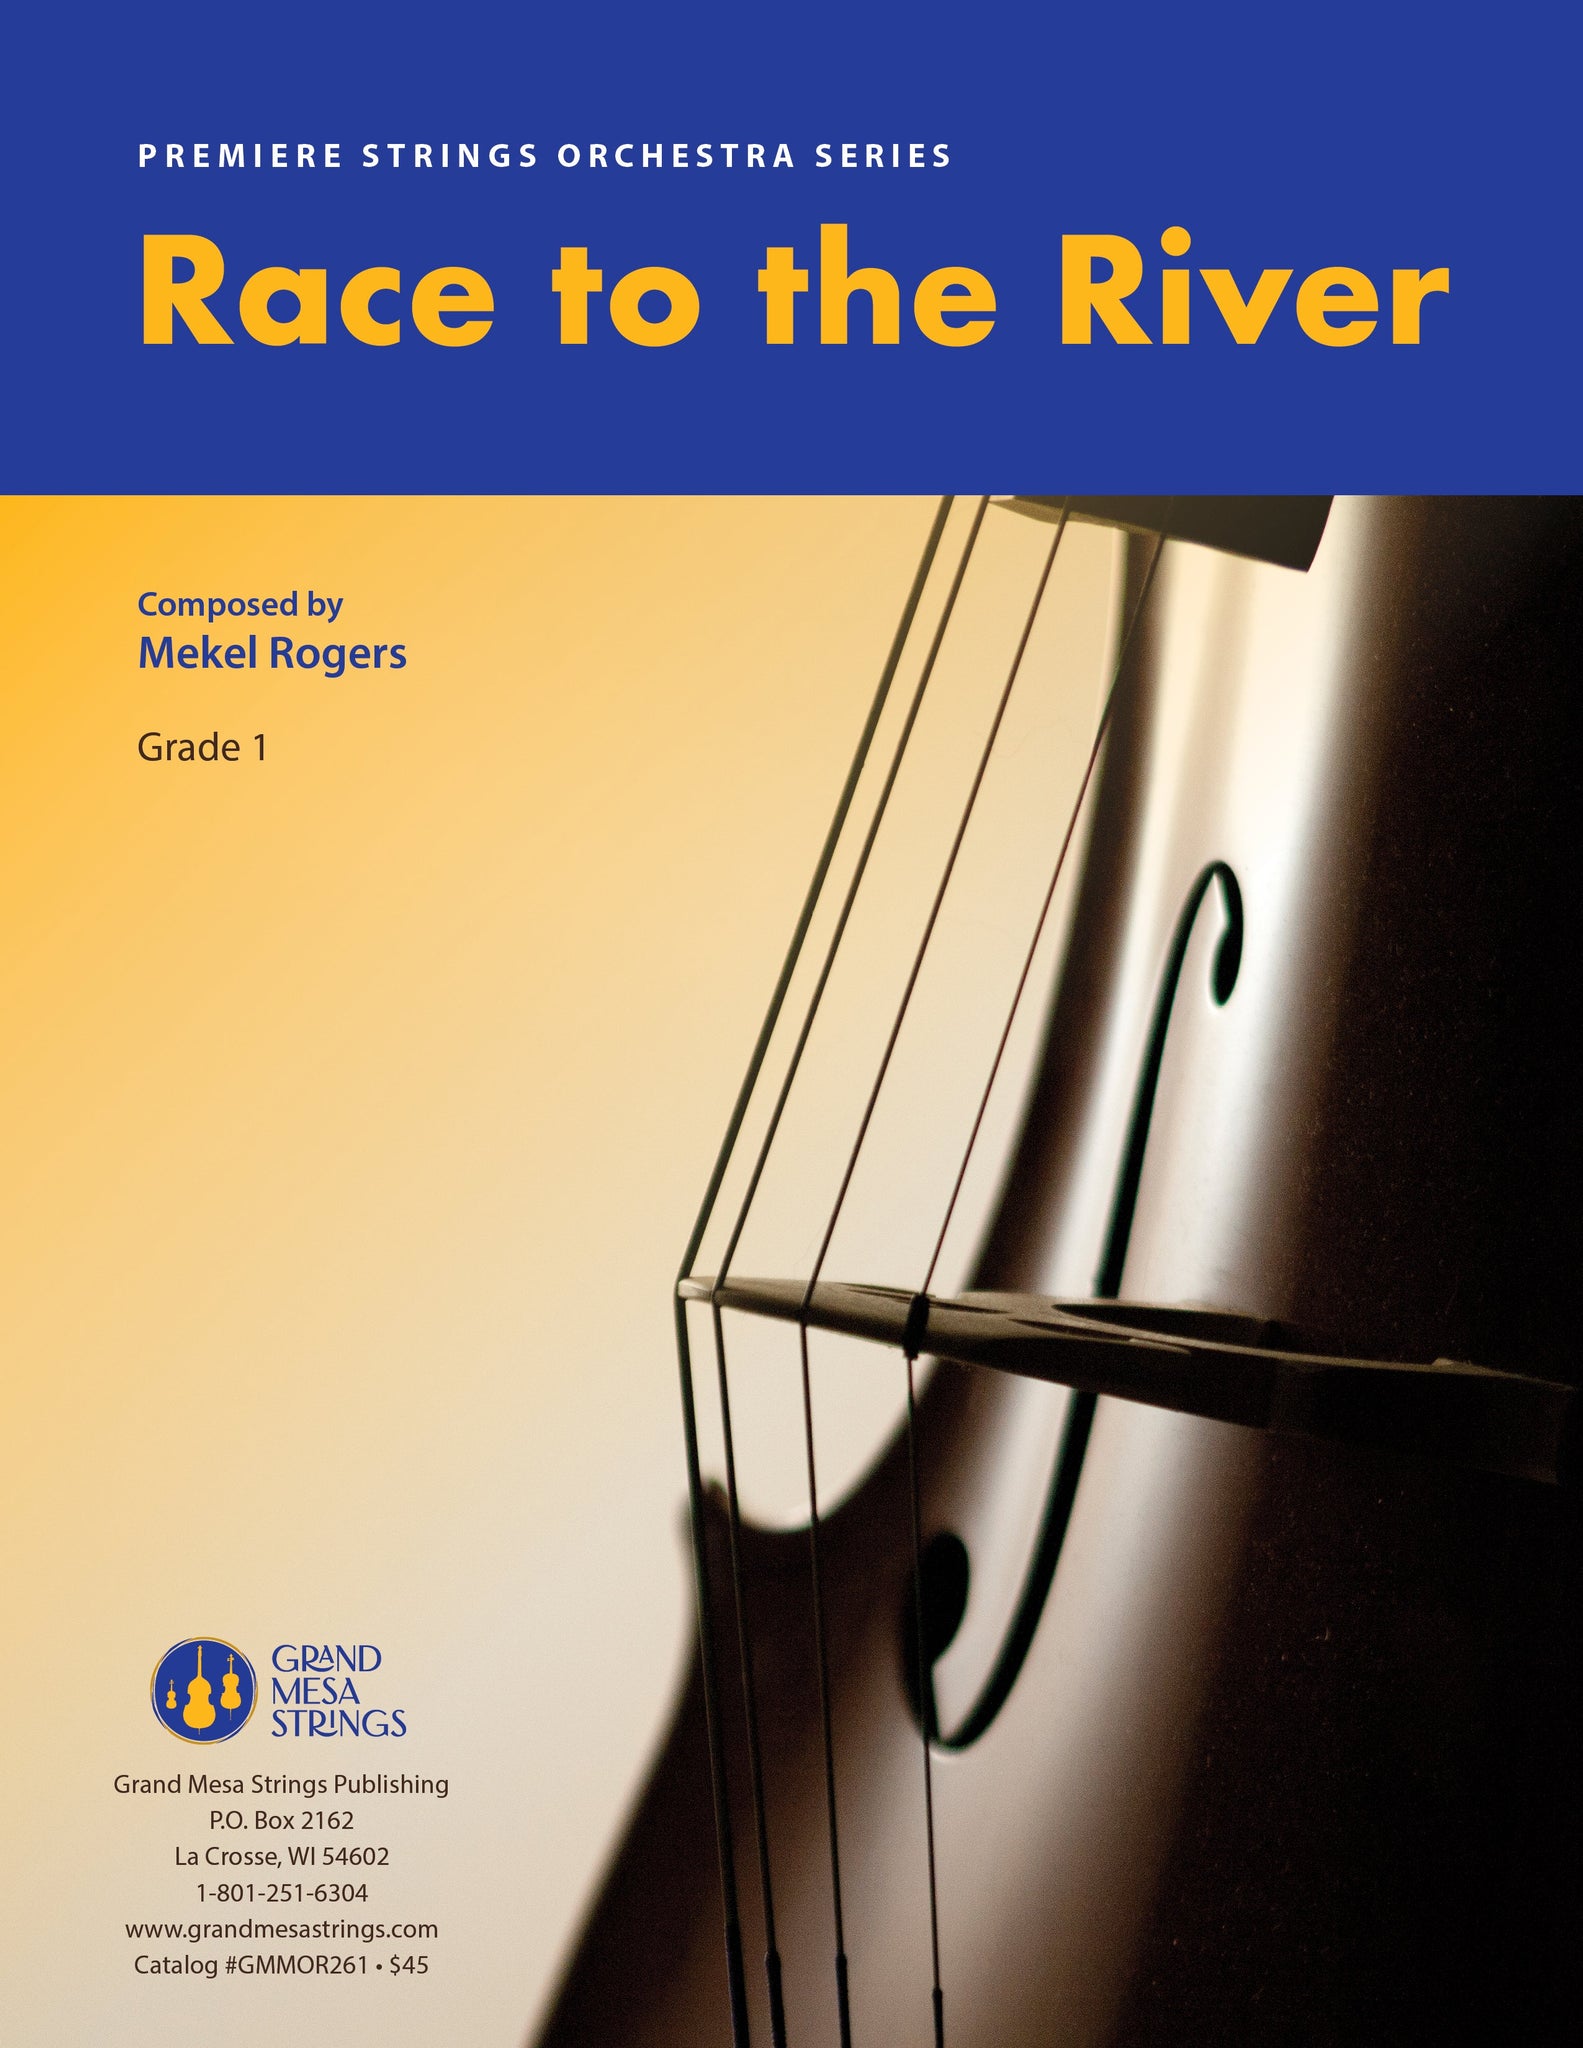 Strings sheet music cover of Race to the River, composed by Mekel Rogers.